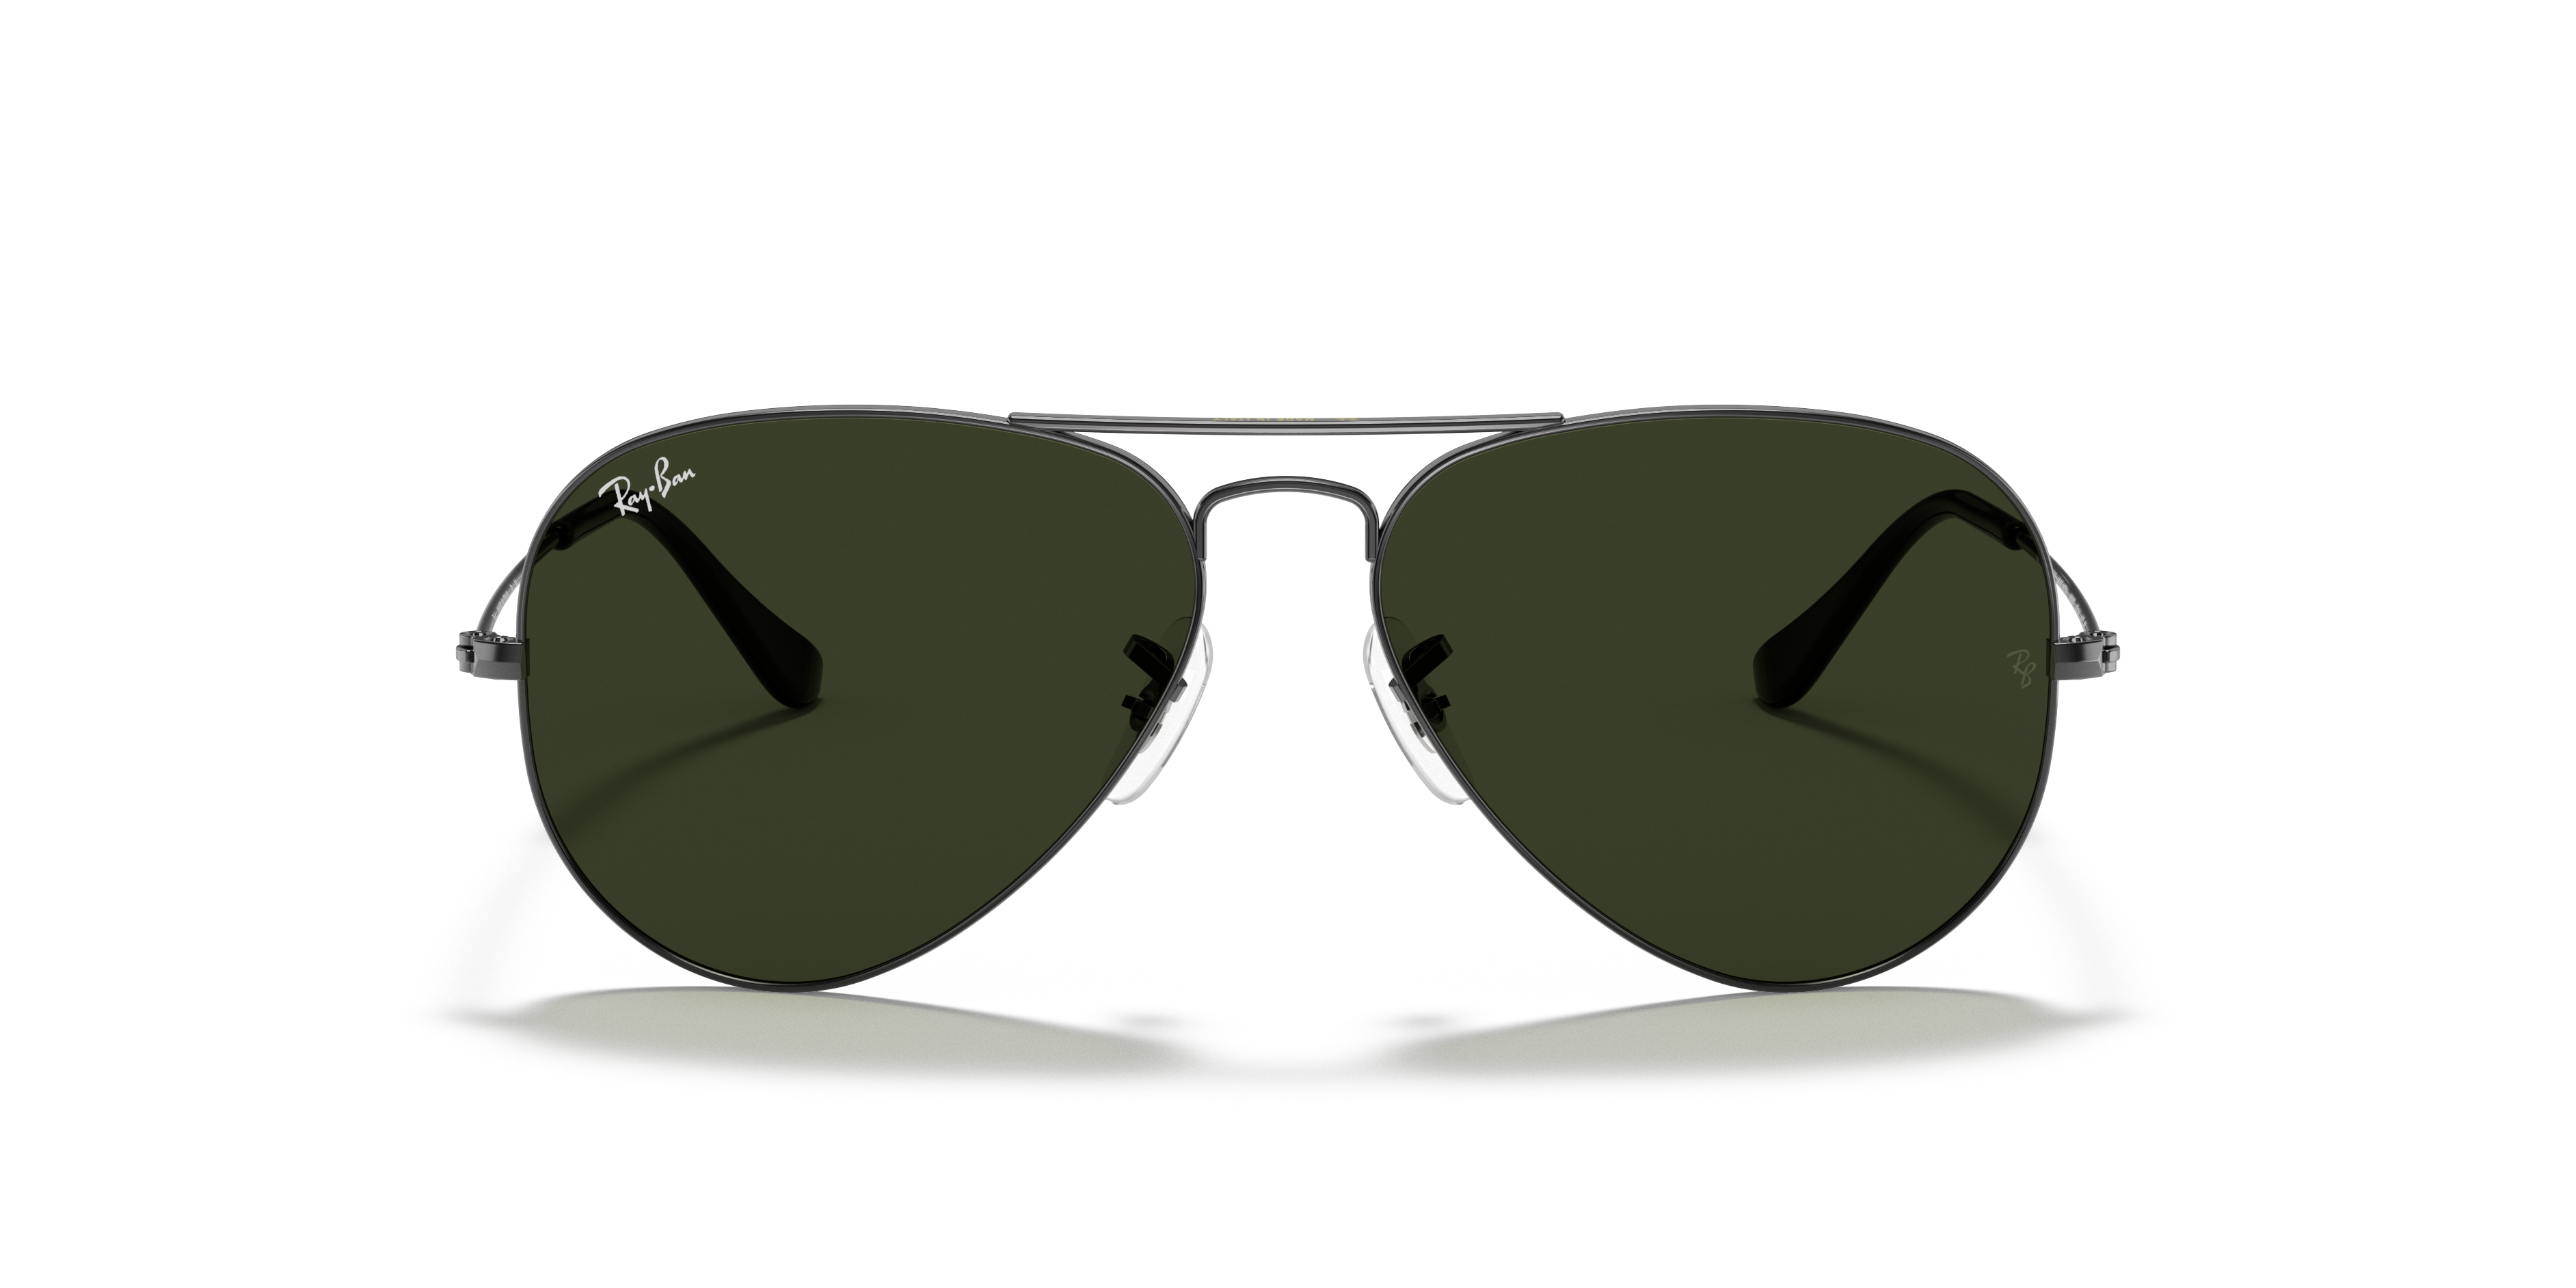 Buy JUST-STYLE Aviator Sunglasses For men and Women Silver frame(transparent)  at Amazon.in